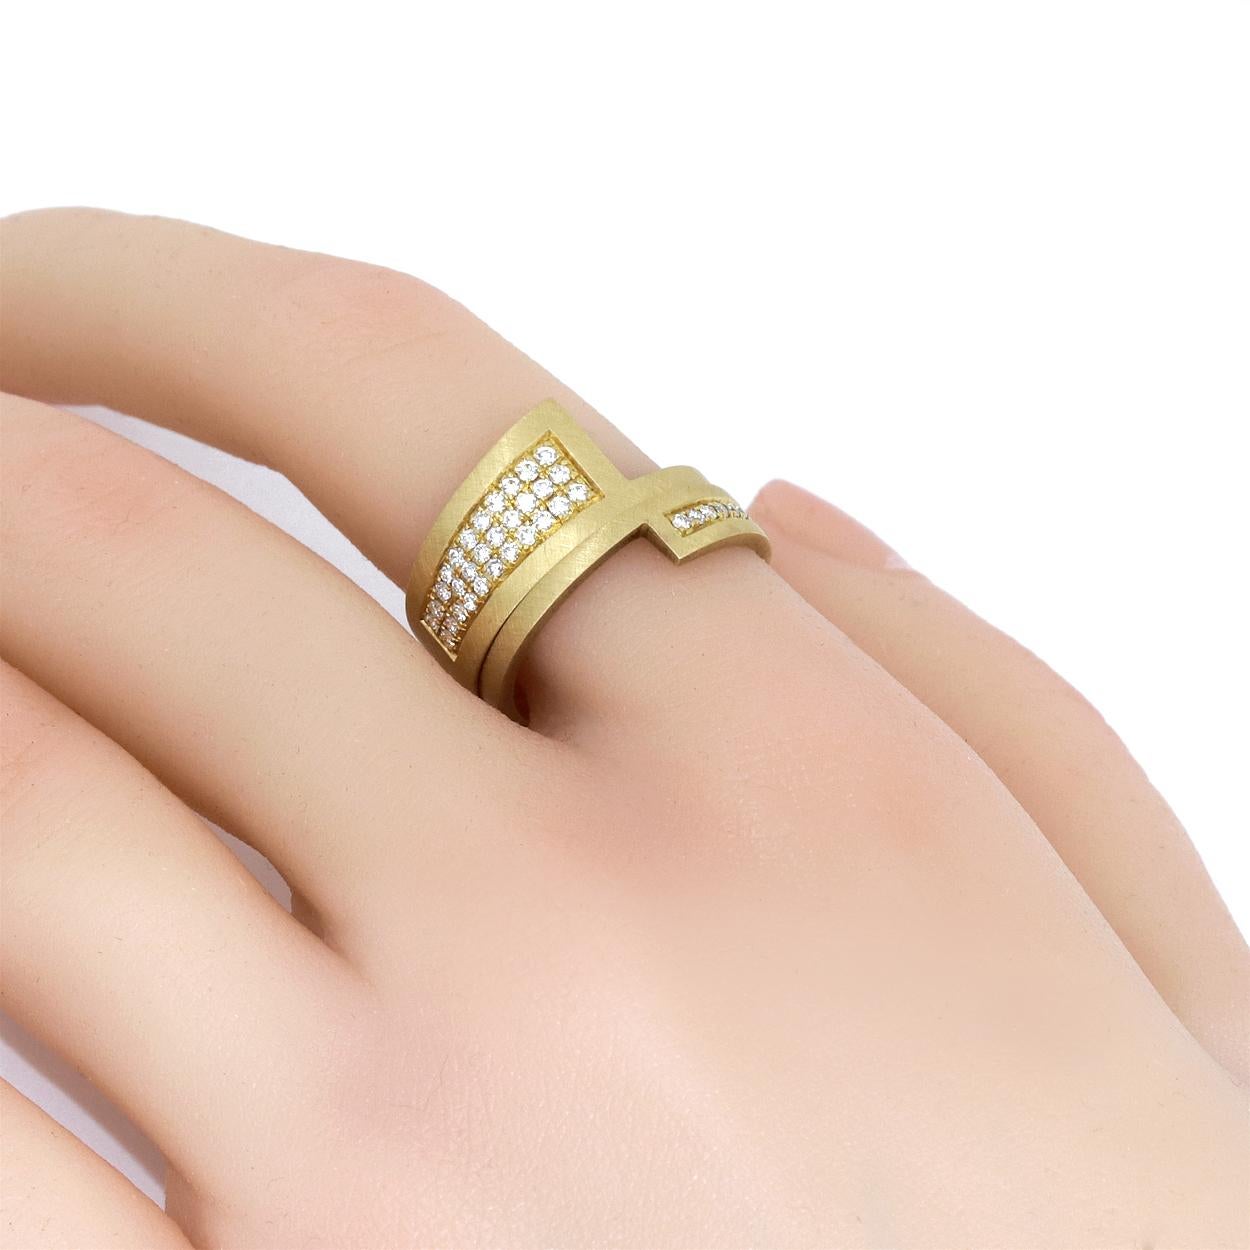 Nordic Stacking Rings hand-fabricated in Denmark by jewellery maker Annette Wille in signature finished 18k yellow gold, featuring two spectacular rings from her renowned Nordic collection. The first band is 9.5mm in width and set with thirty round